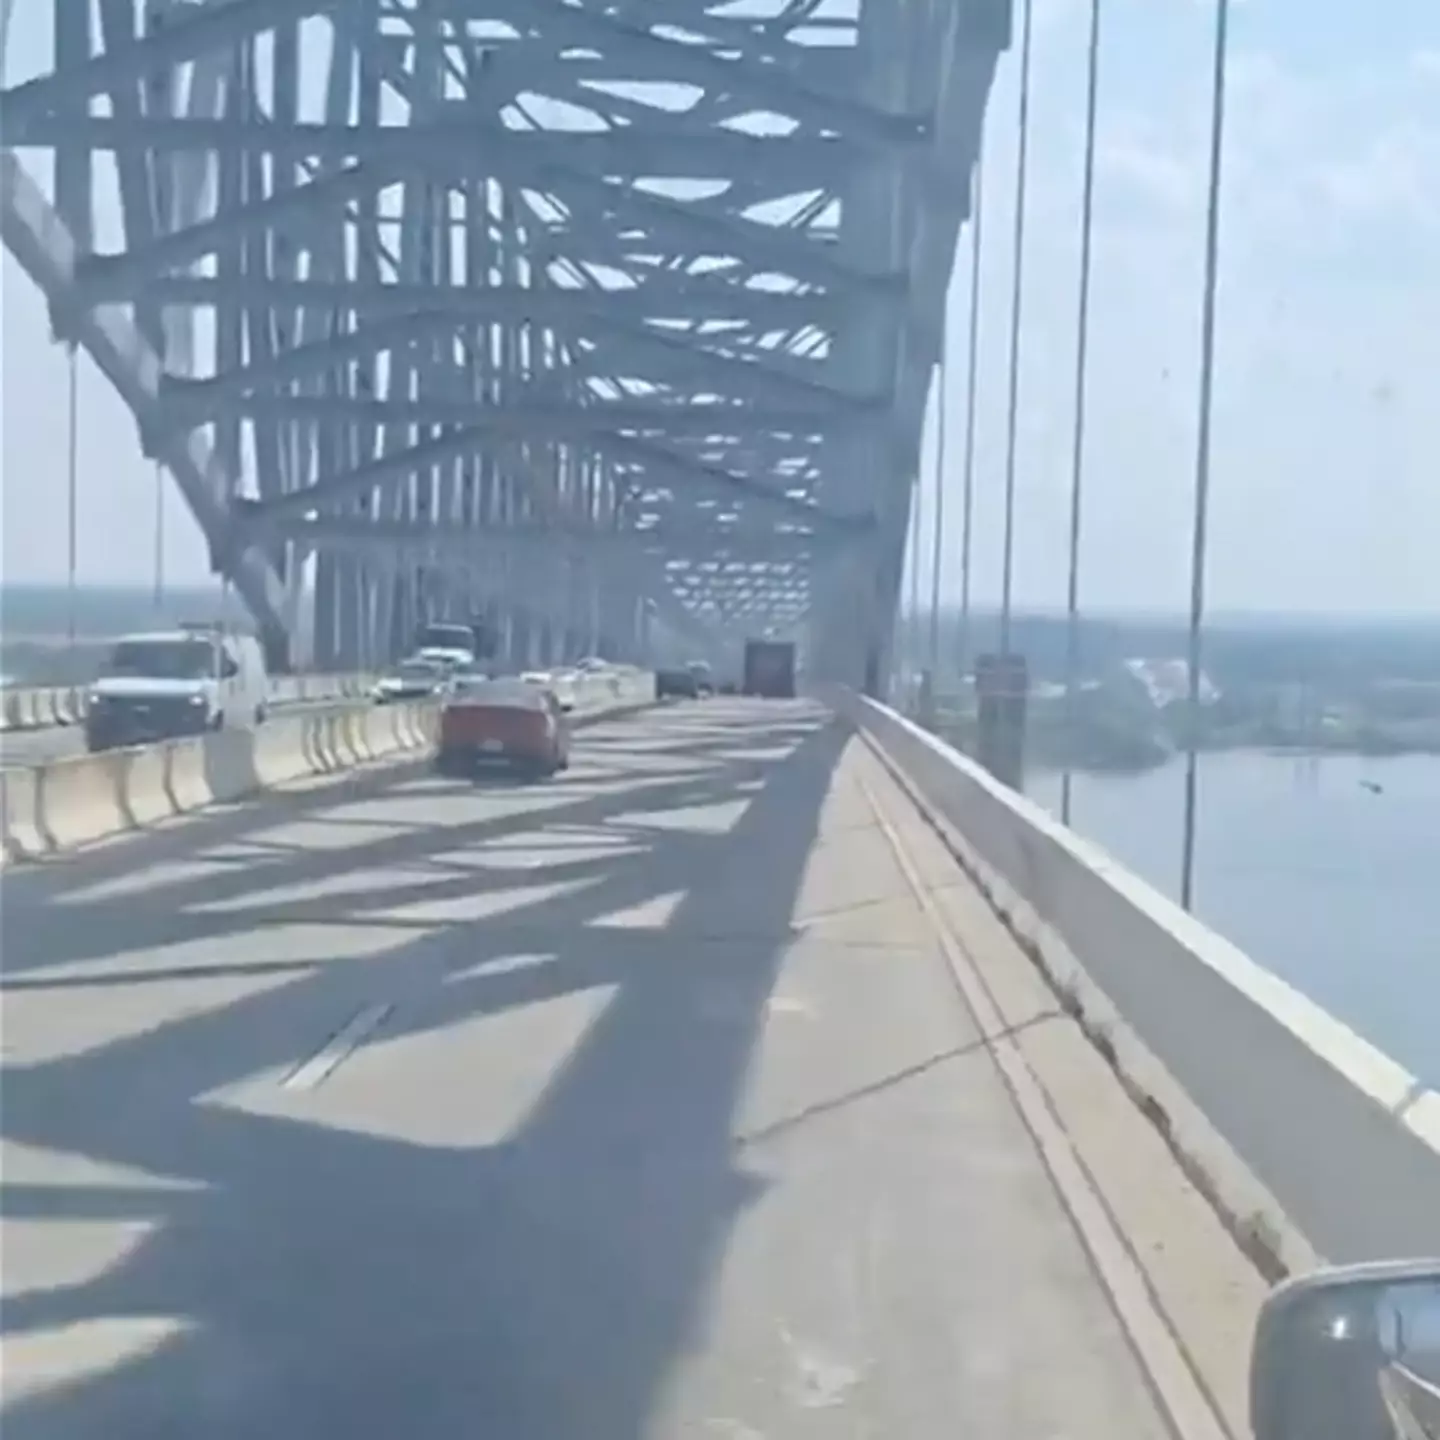 ‘Scary’ footage comparing driving across Baltimore Bridge to a rollercoaster resurfaces after collapse